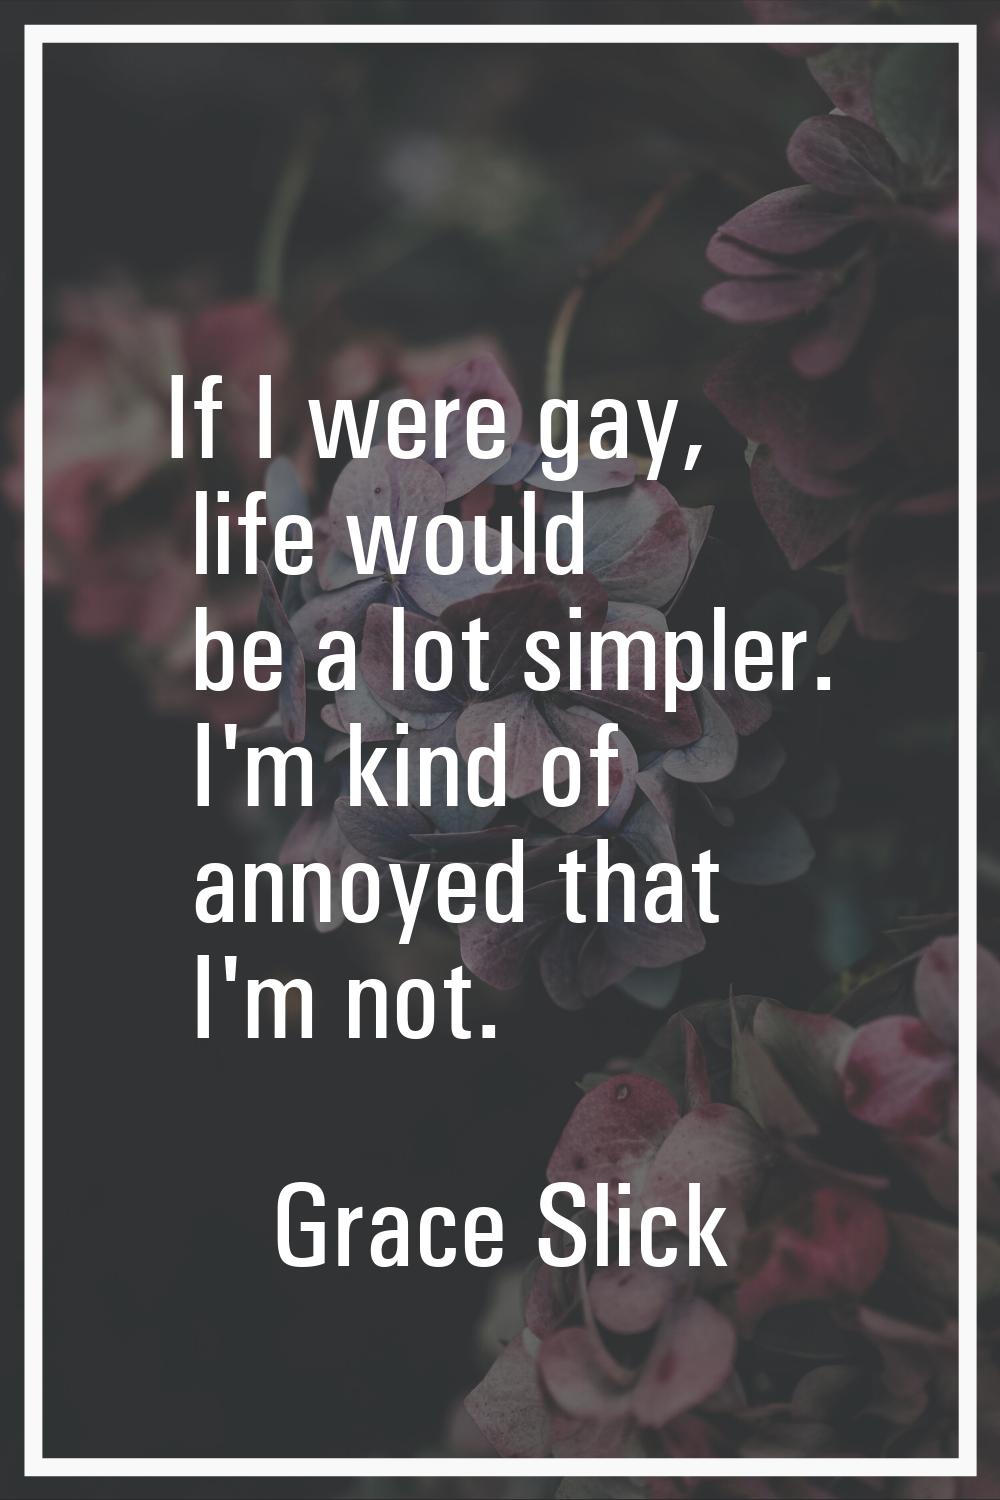 If I were gay, life would be a lot simpler. I'm kind of annoyed that I'm not.